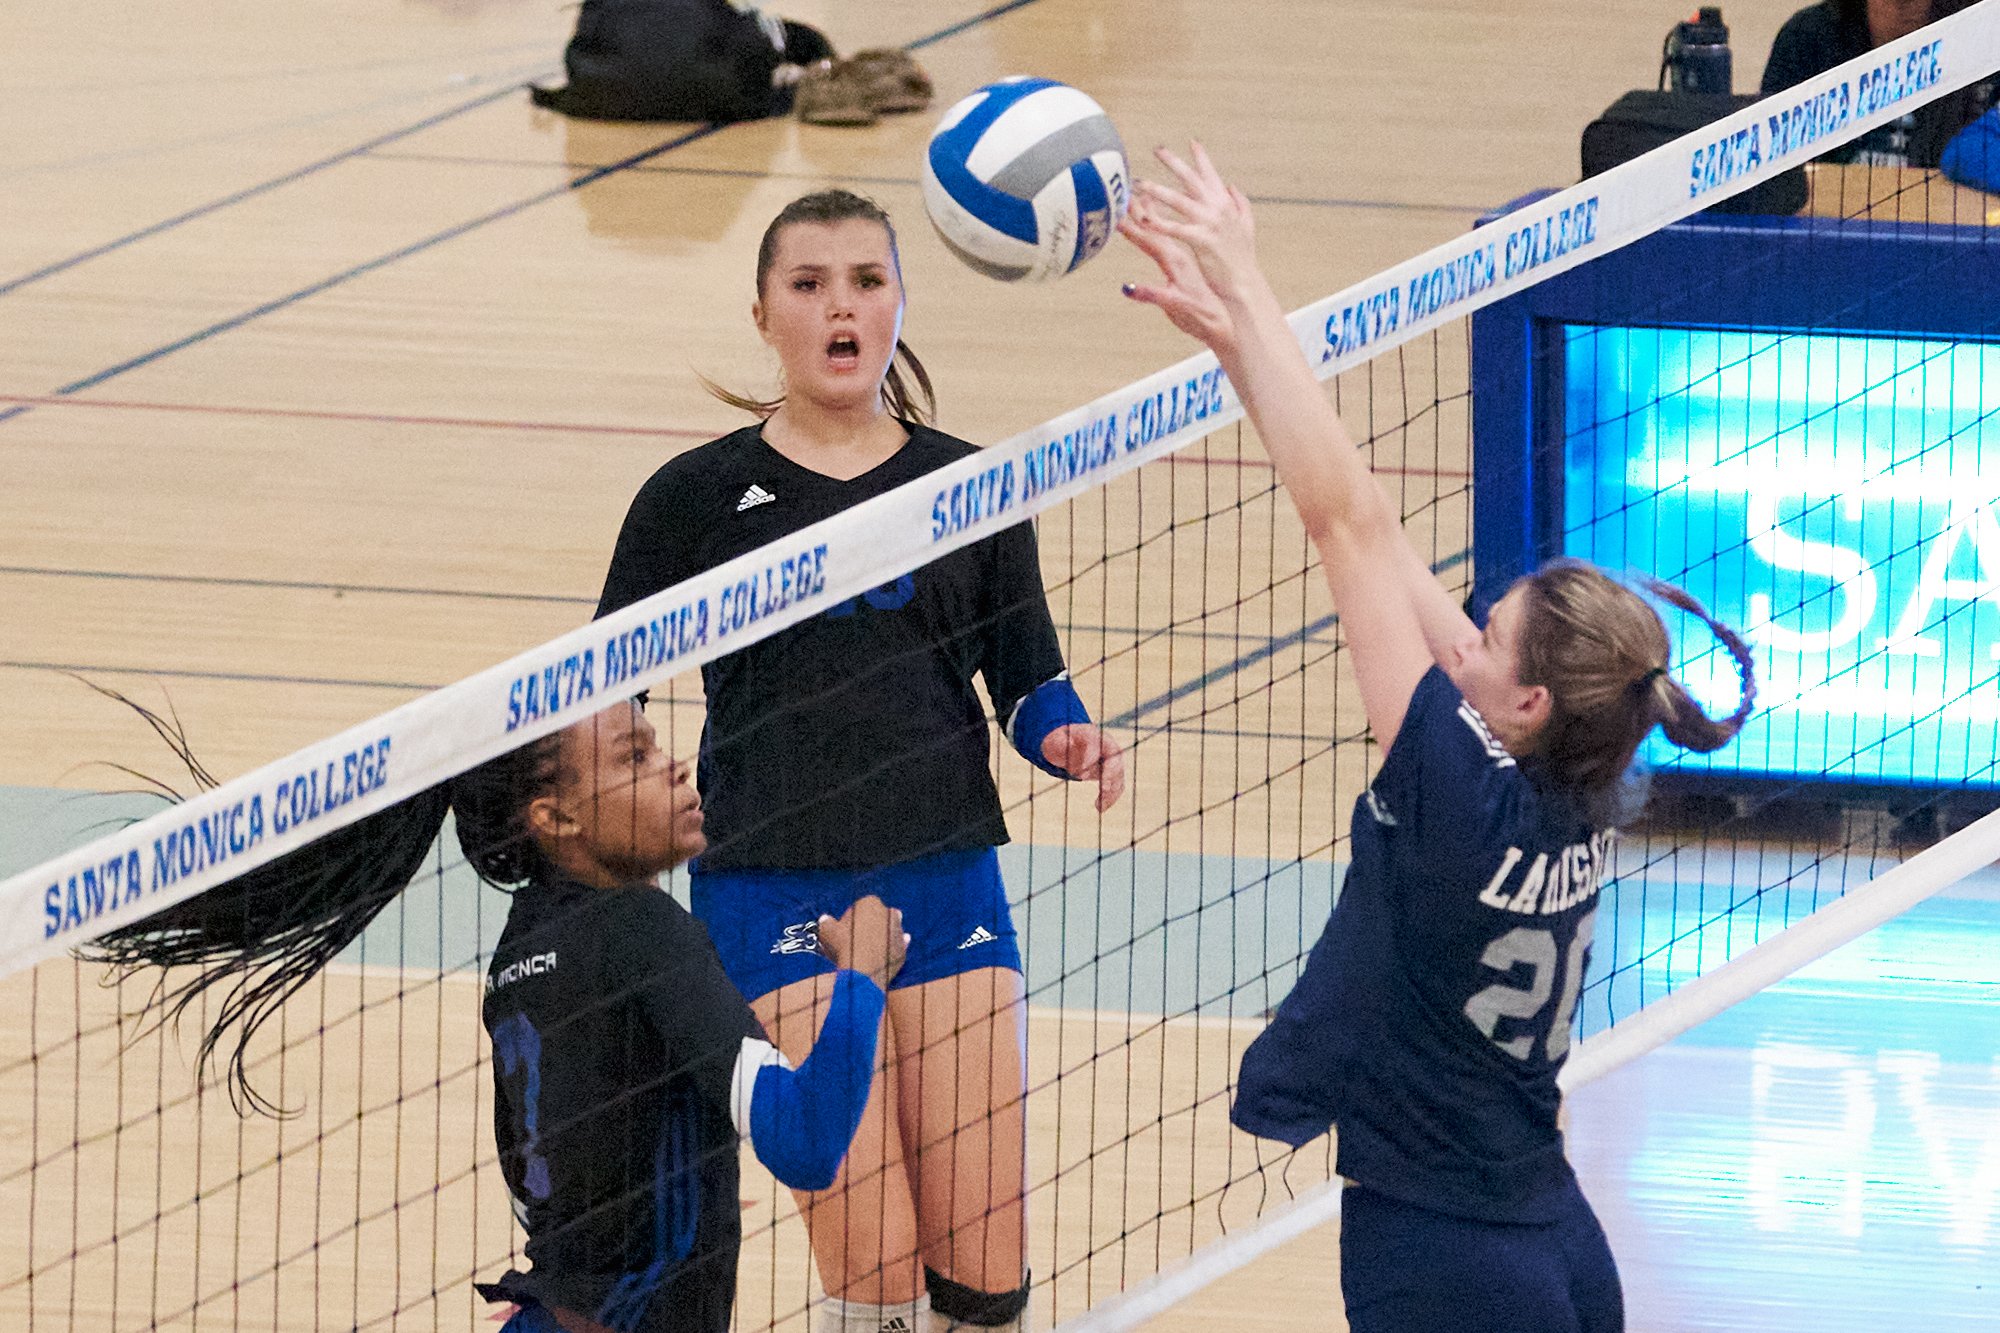  Santa Monica College Corsairs' Zarha Stanton, Mackenzie Wolff, and Los Angeles Mission College Eagles' McKenna Keil during the women's volleyball match on Friday, October 7, 2022, at the Corsair Gym in Santa Monica, Calif. The Corsairs won 3-0. (Nic